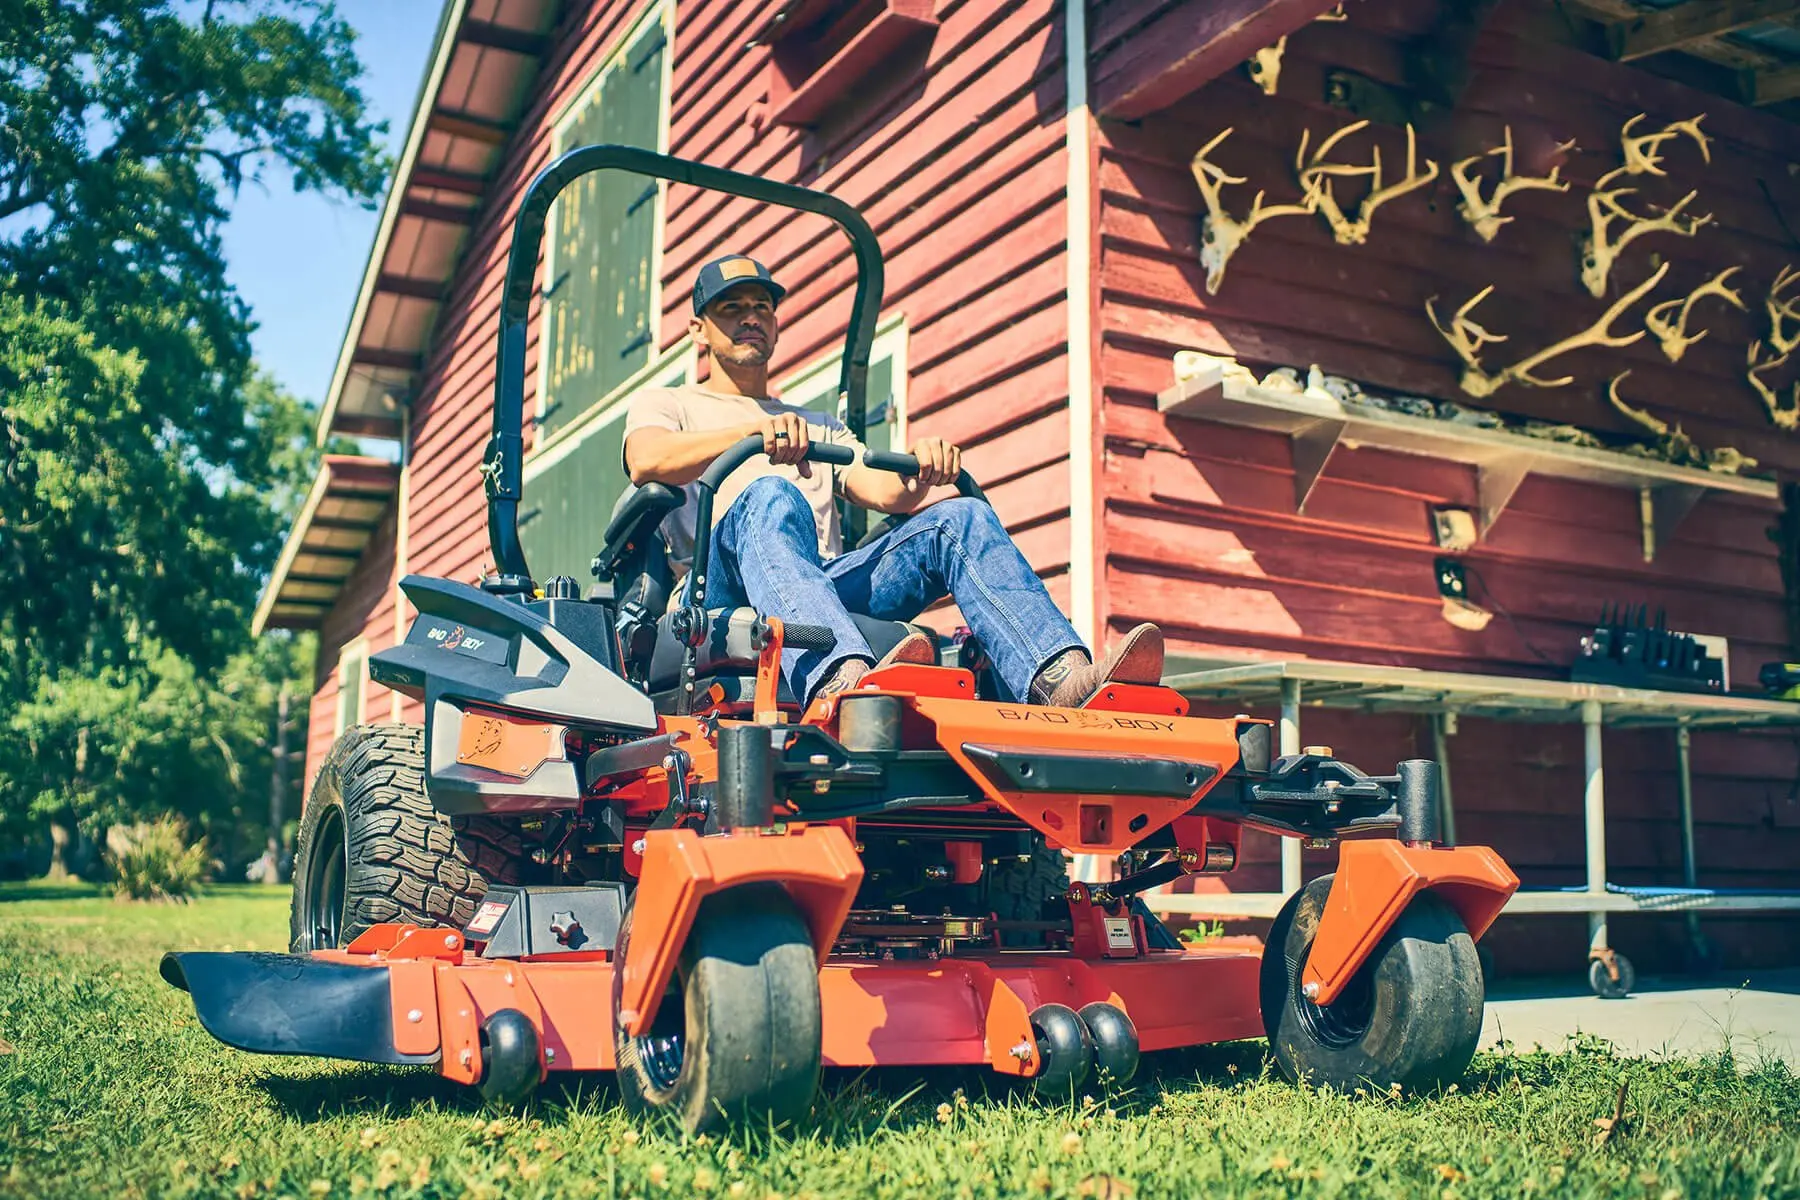 Browse Specs and more for the Outlaw Rouge Gas Mower - Bobcat of Indy